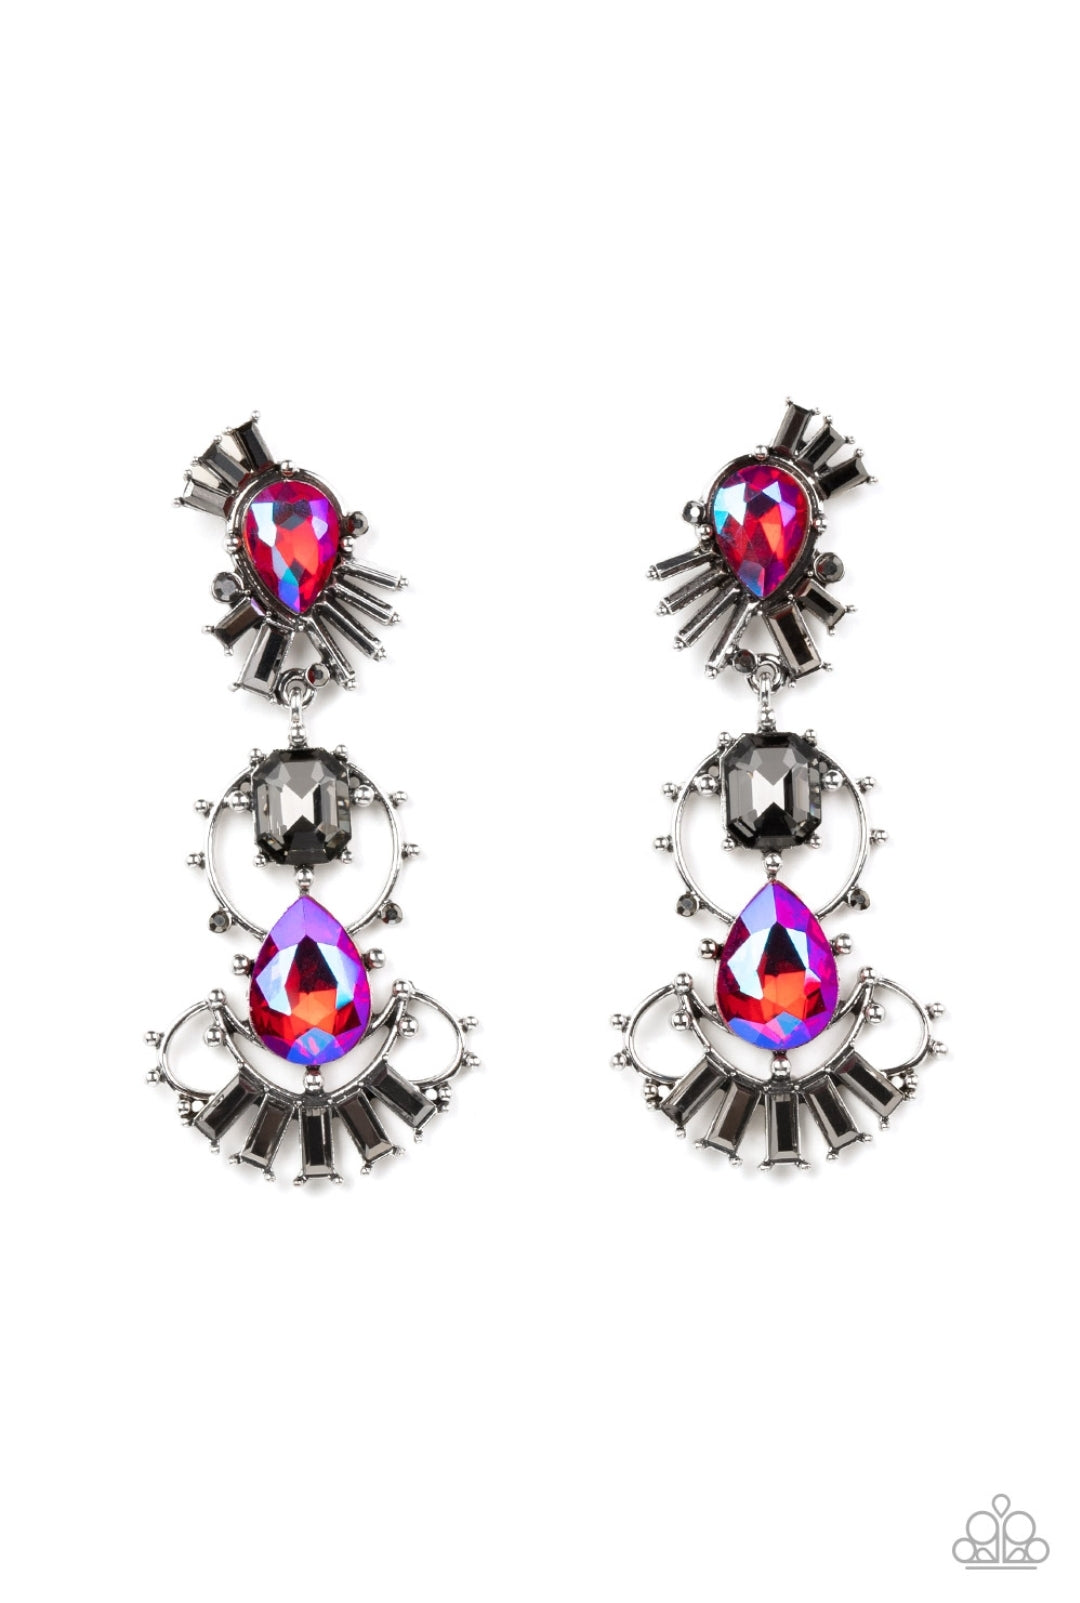 Ultra Universal Multi Pink & Black Earrings July 2022 Life of the Party Exclusives - Princess Glam Shop